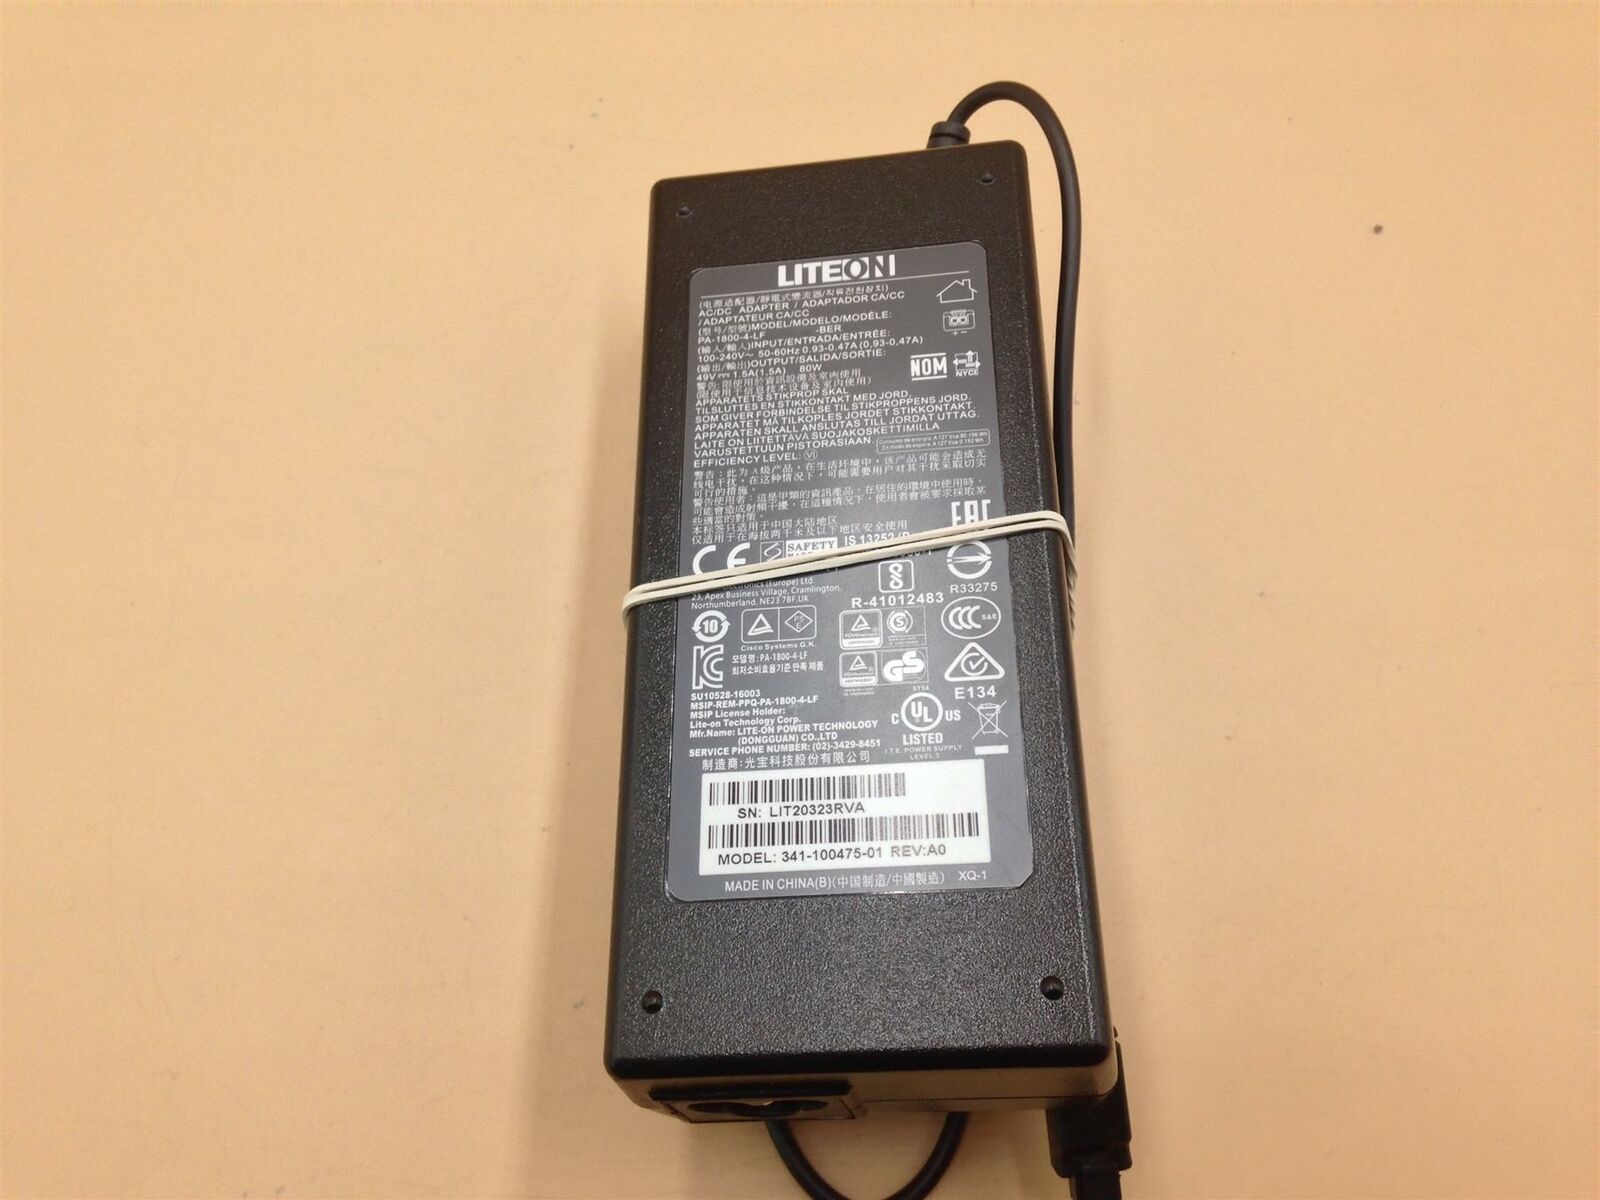 Liteon PA-1800-4-LF 341-100475-01 49V 1.5A 74W AC Adapter Power Charger, Brand: Liteon Compatible Brand: Universal T - Click Image to Close